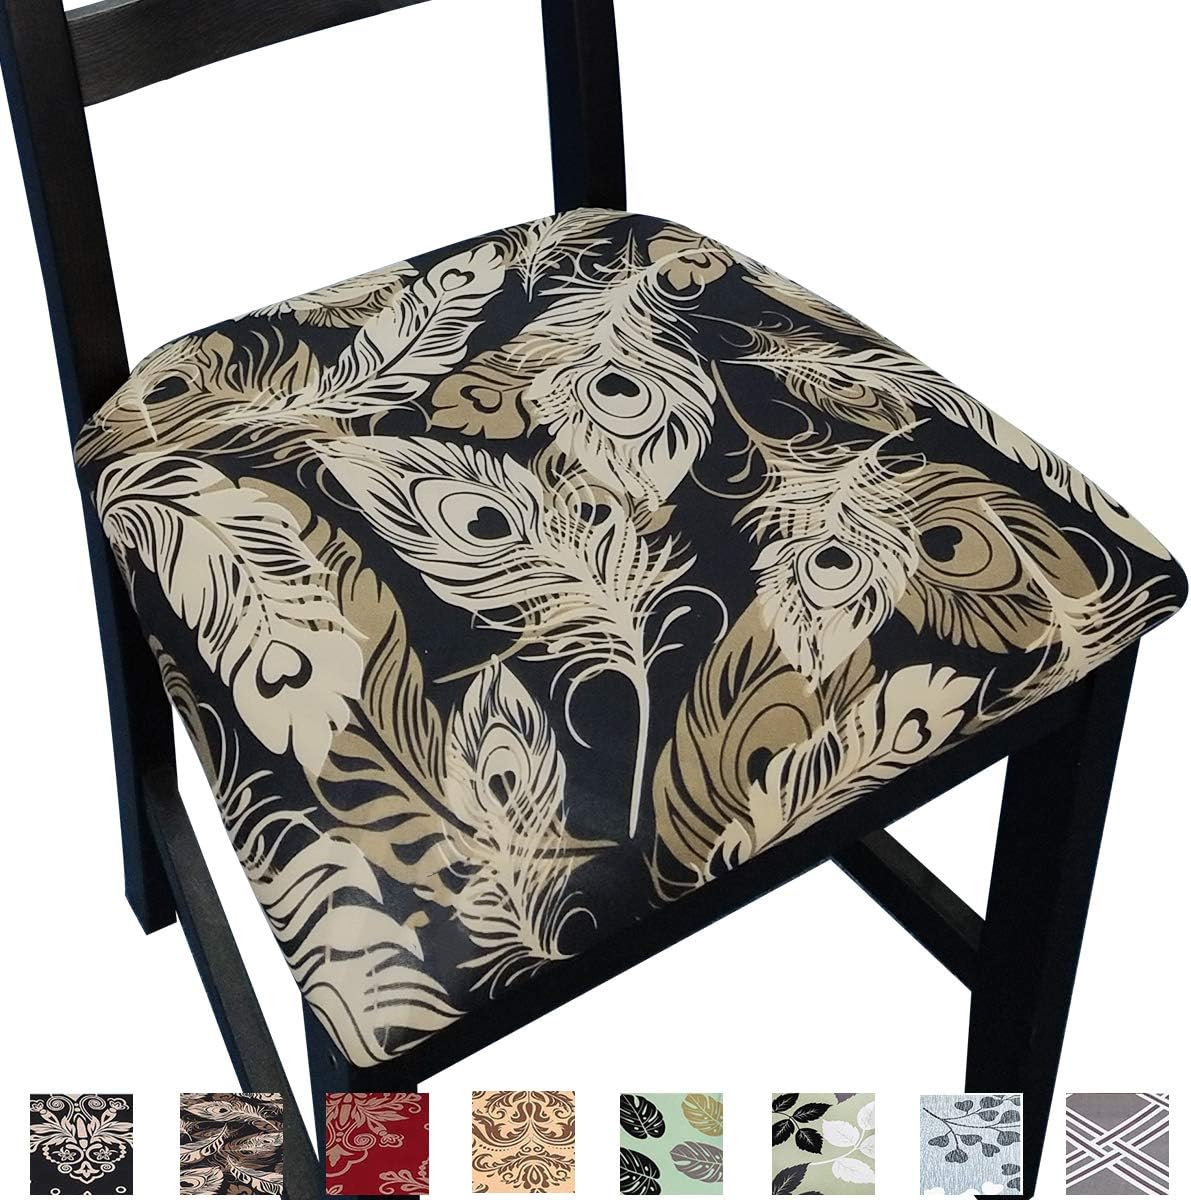 Chair Seat Covers, Black Seat Covers For Dining Room Chairs